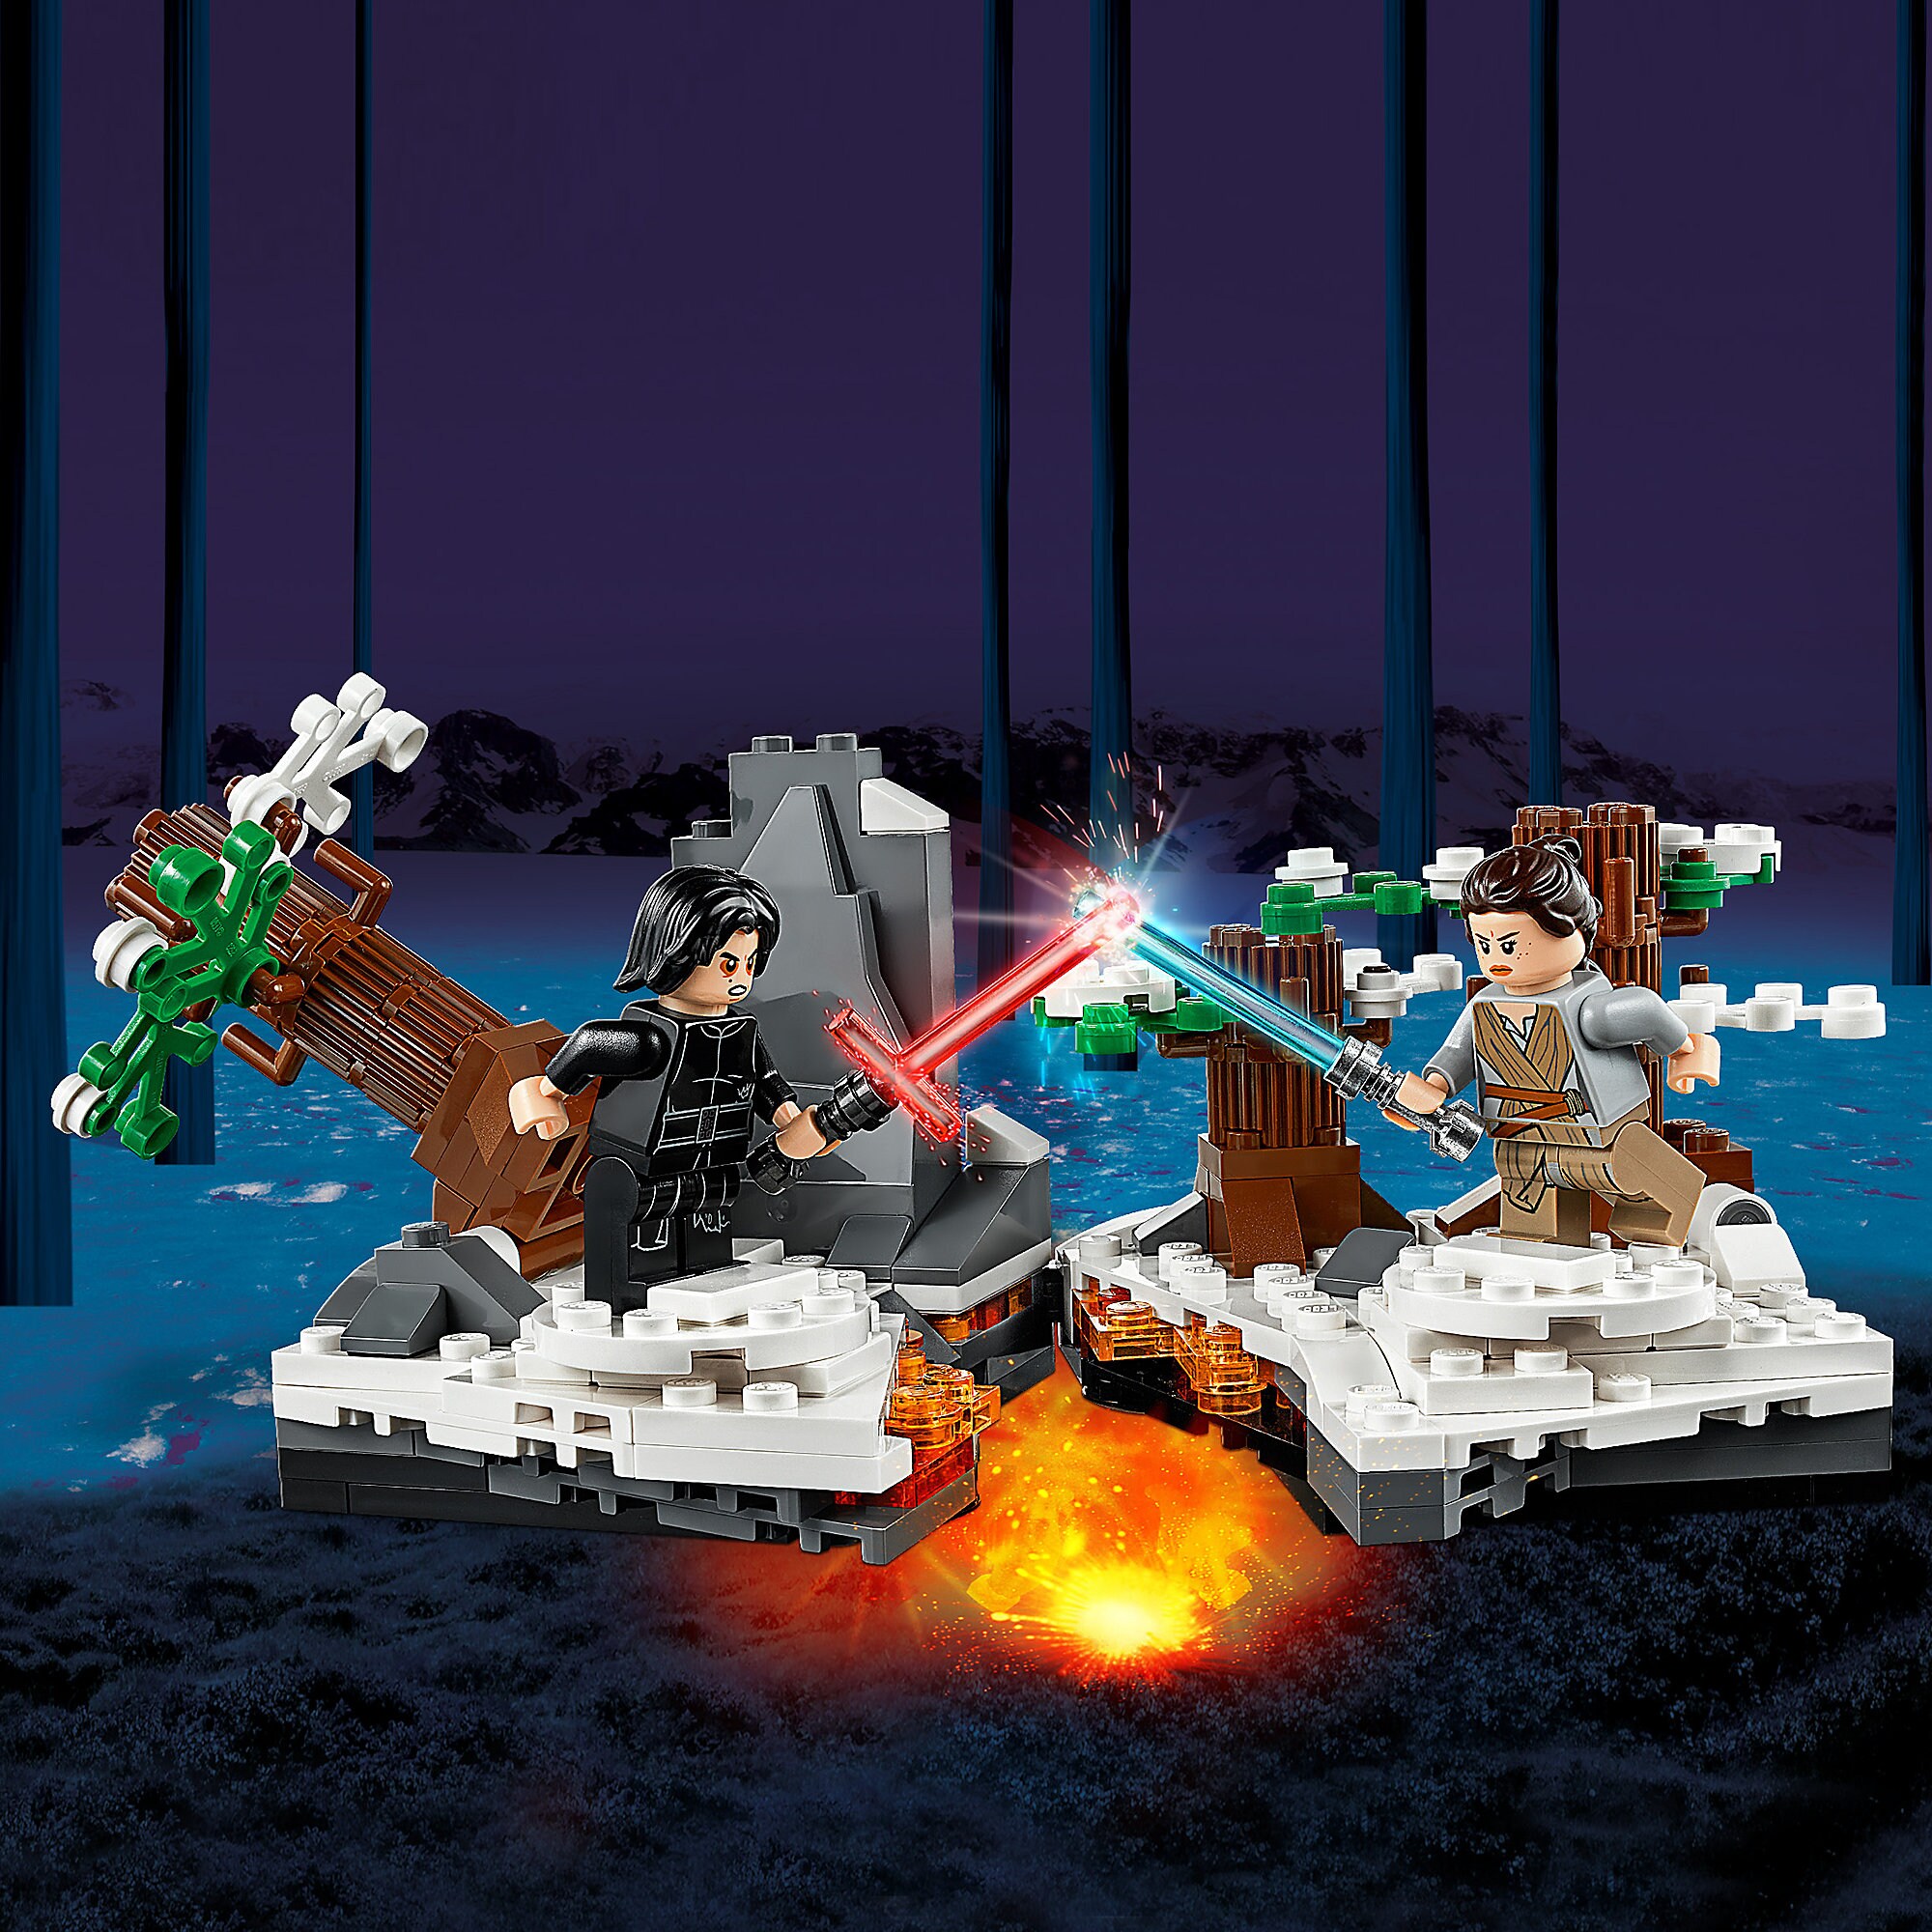 Duel on Starkiller Base Play Set by LEGO - Star Wars: The Force Awakens